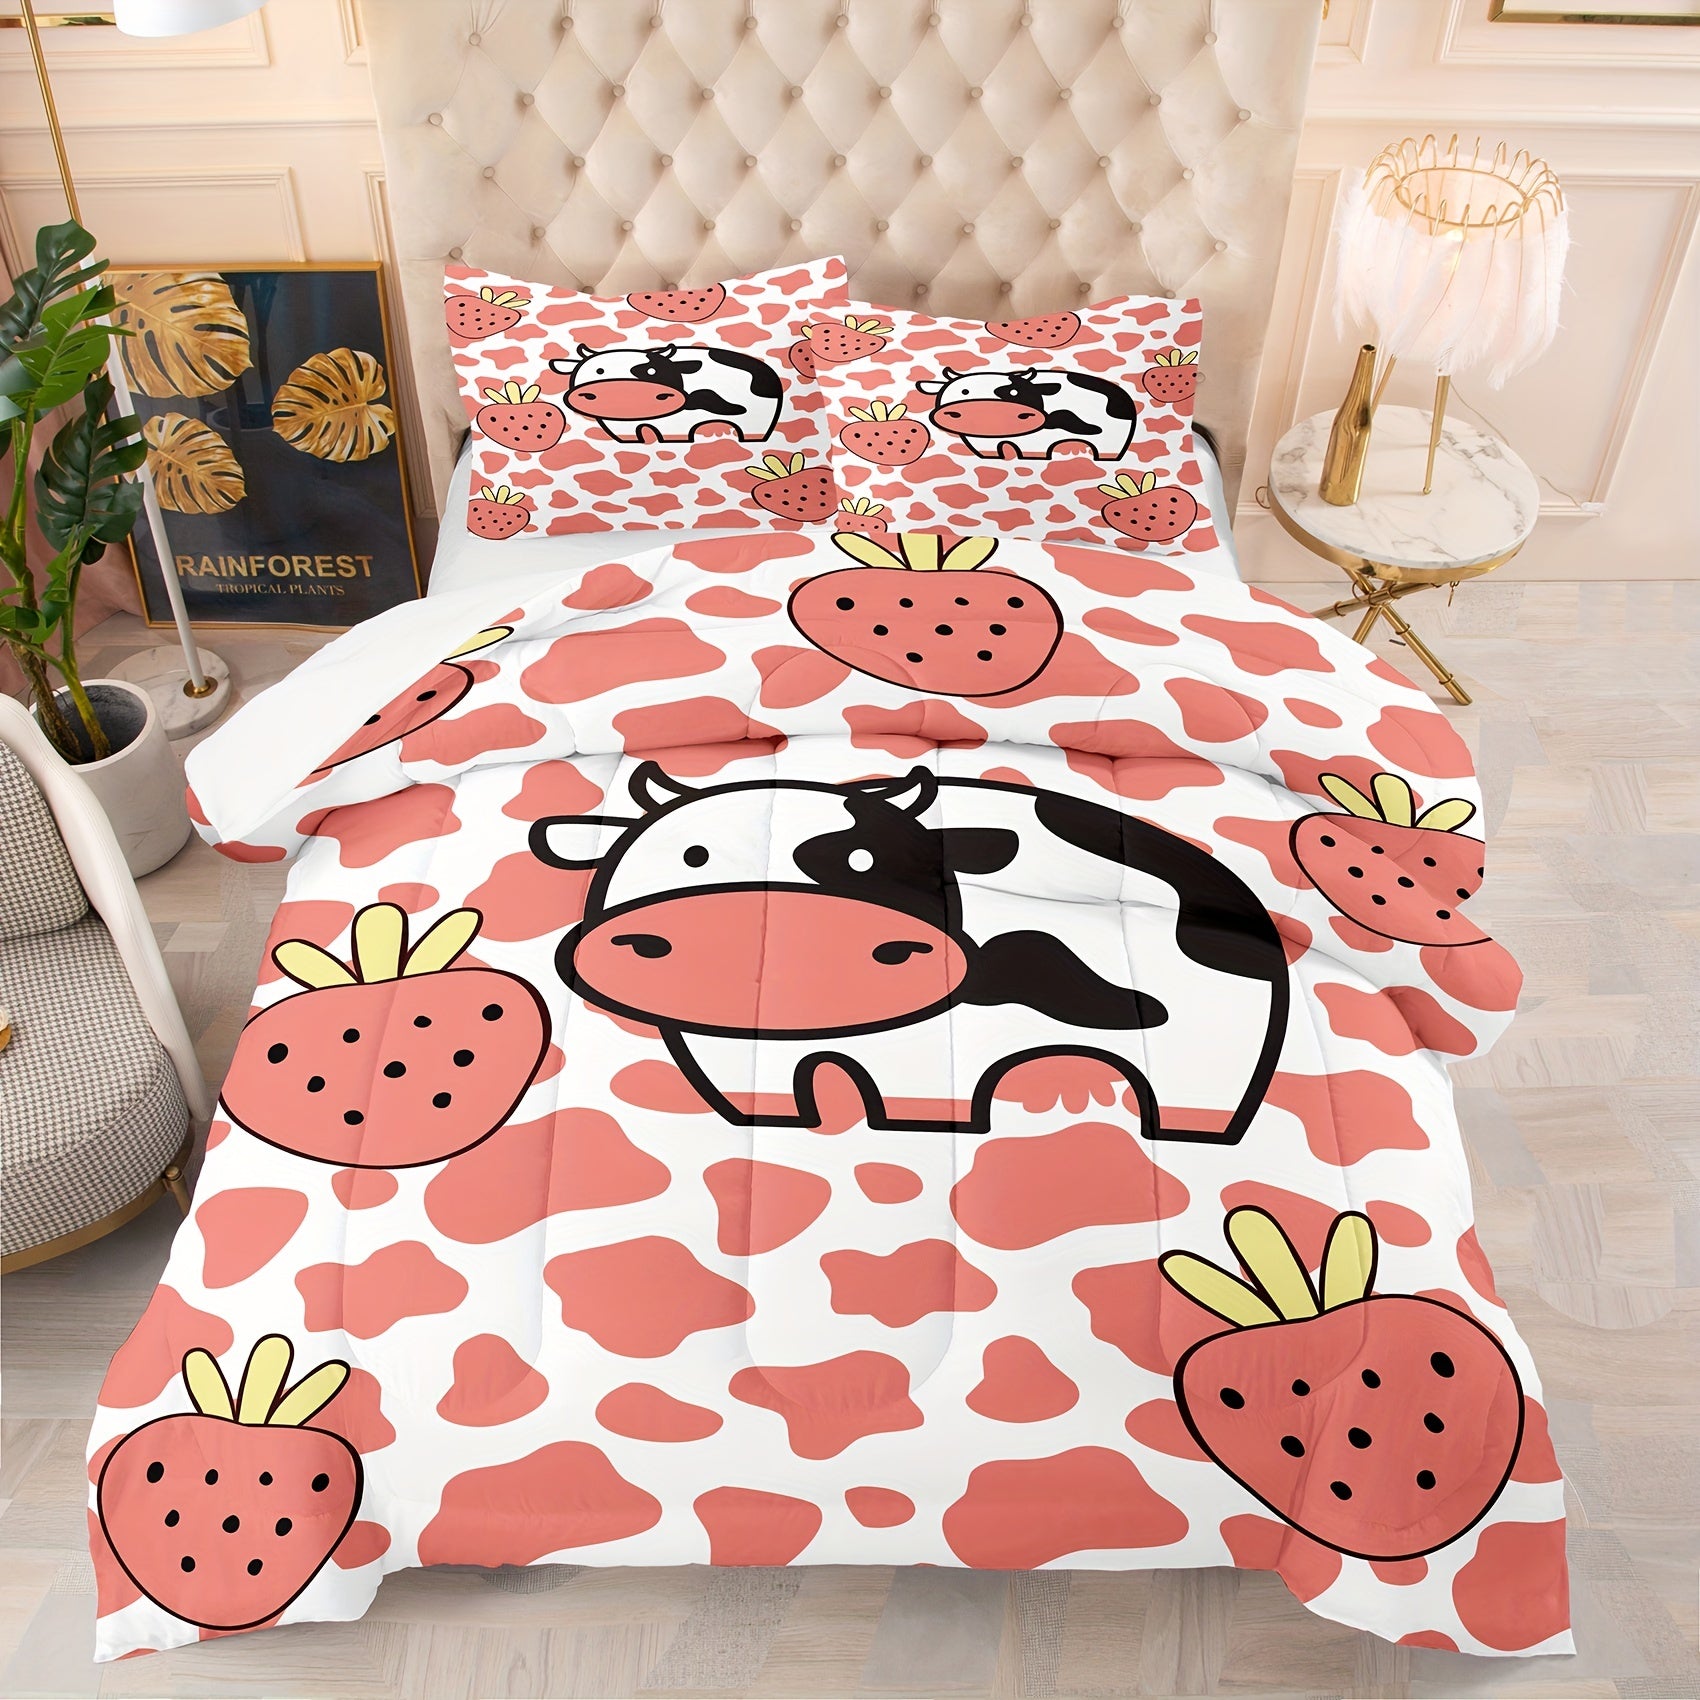 2/3pcs Modern Fashion Comforter Set, Cute Cartoon Cow Strawberry Print Bedding Set, Soft Comfortable And Skin-friendly Comforter For Bedroom, Guest Room (1*Comforter + 1/2*Pillowcase, Without Core)